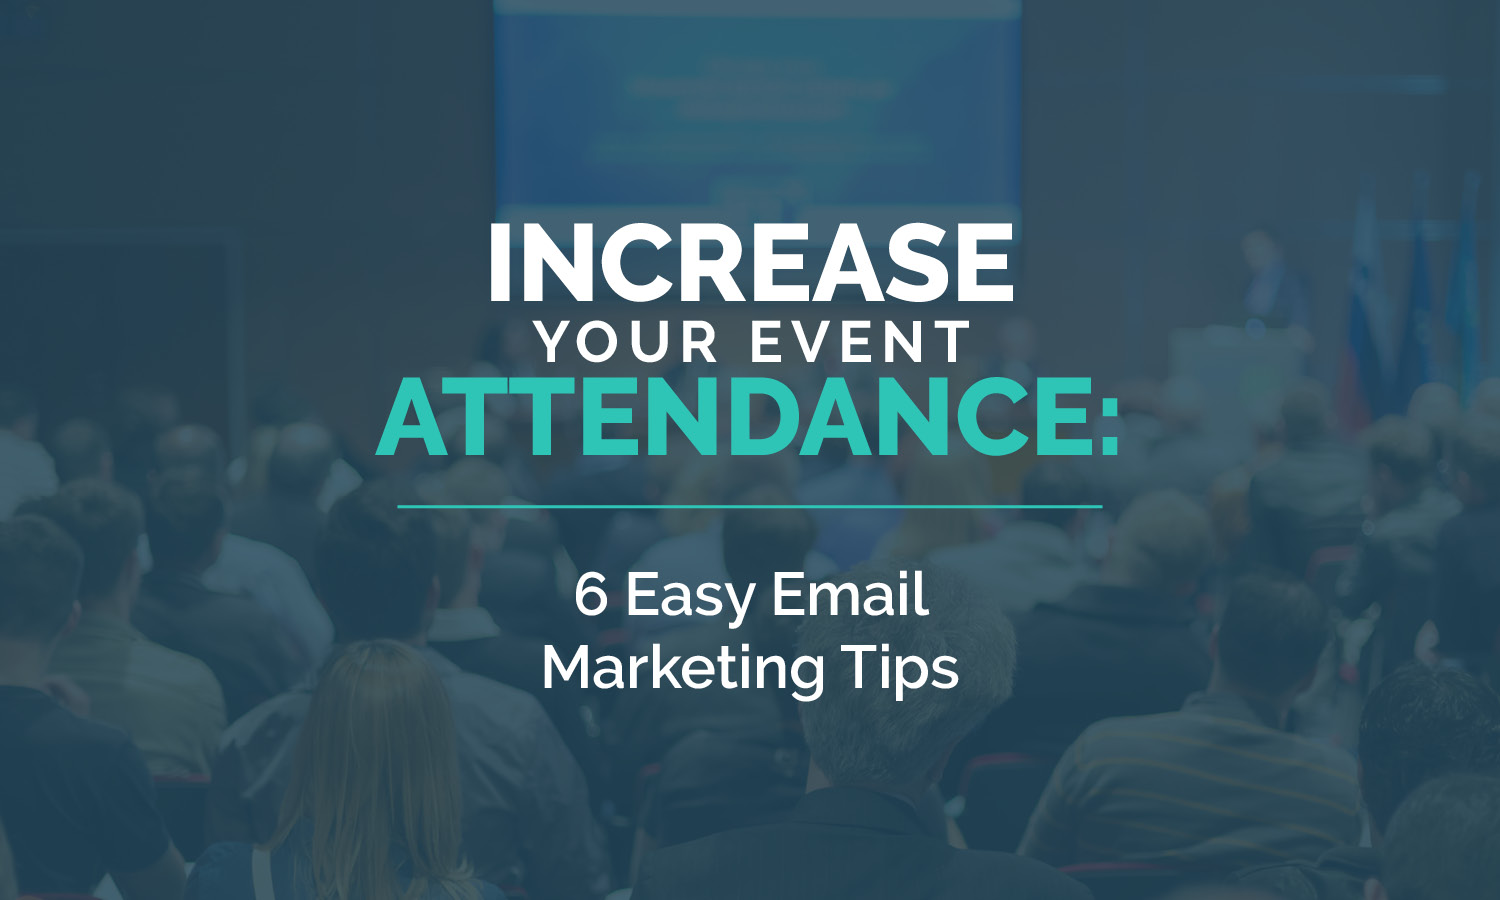 Increase your event attendance with these six simple email marketing tips.